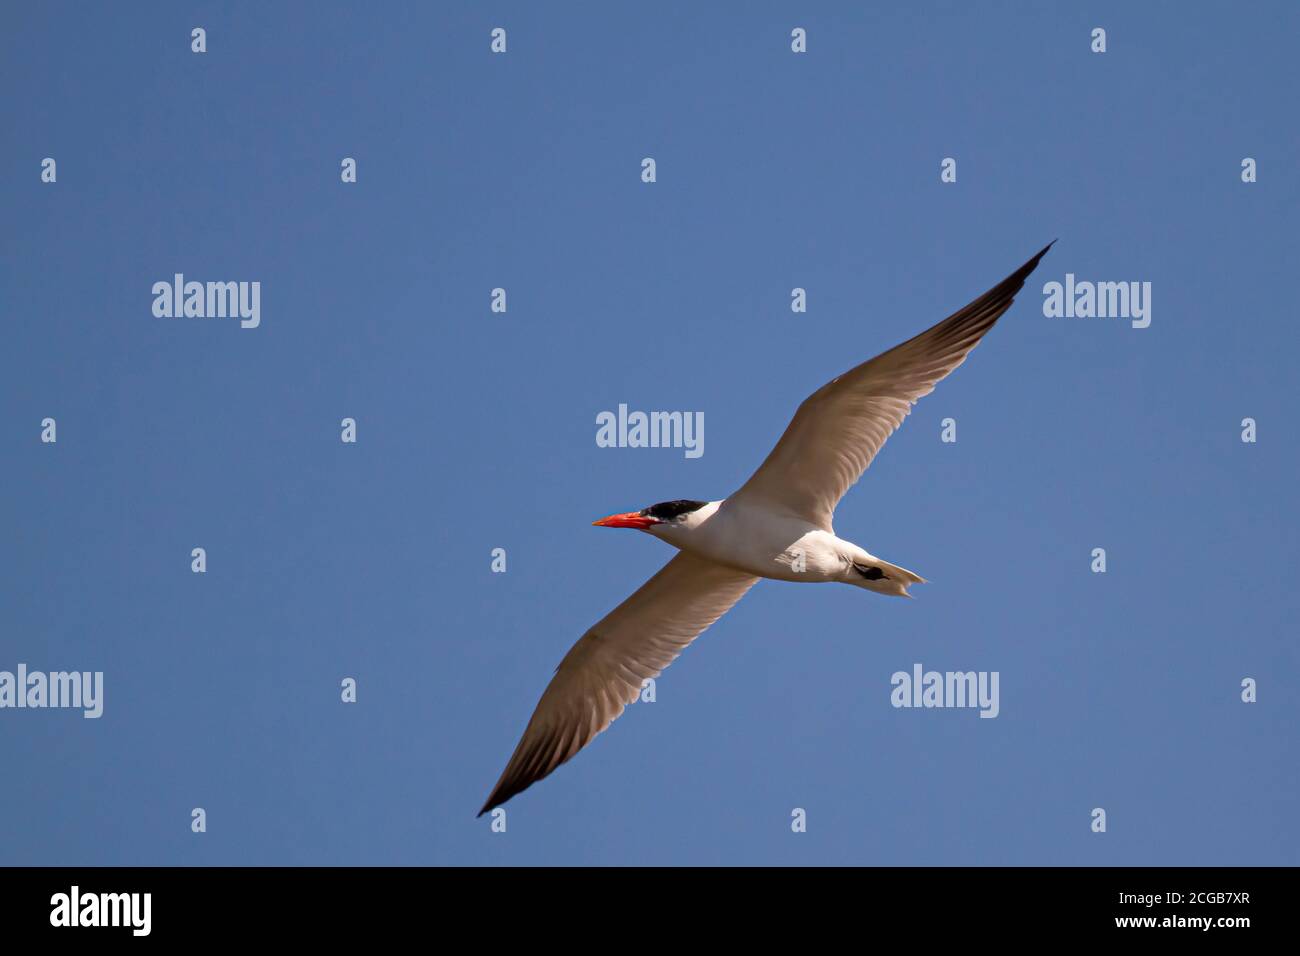 Close up, isolated image of a Caspian tern (Hydroprogne caspia) characterized by red bill, black legs and dark coloration at the tip of the wings and Stock Photo